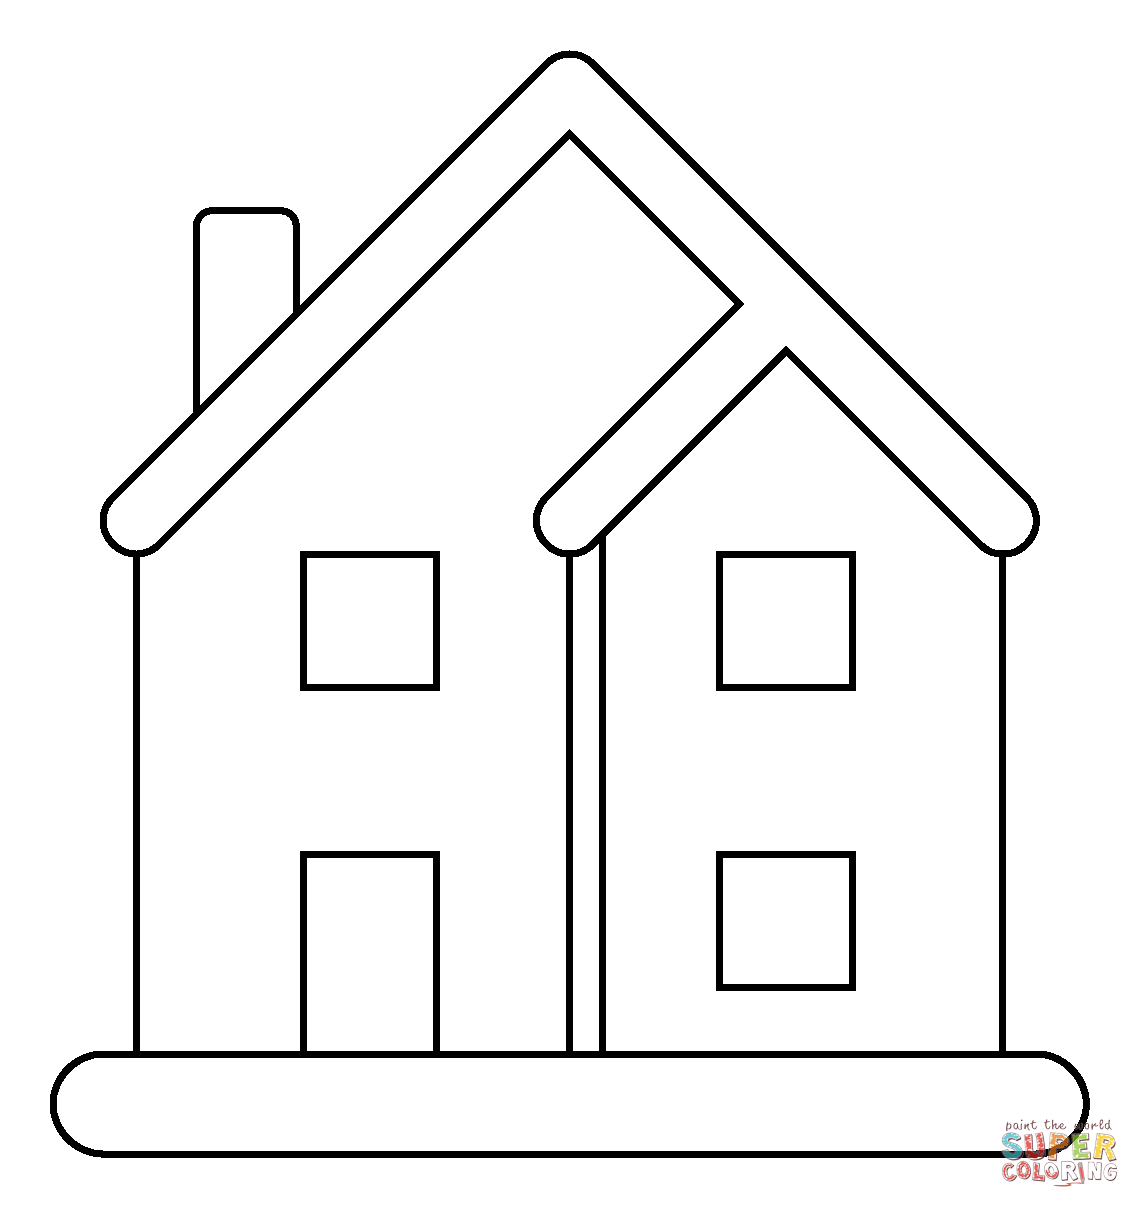 House emoji coloring page free printable coloring pages